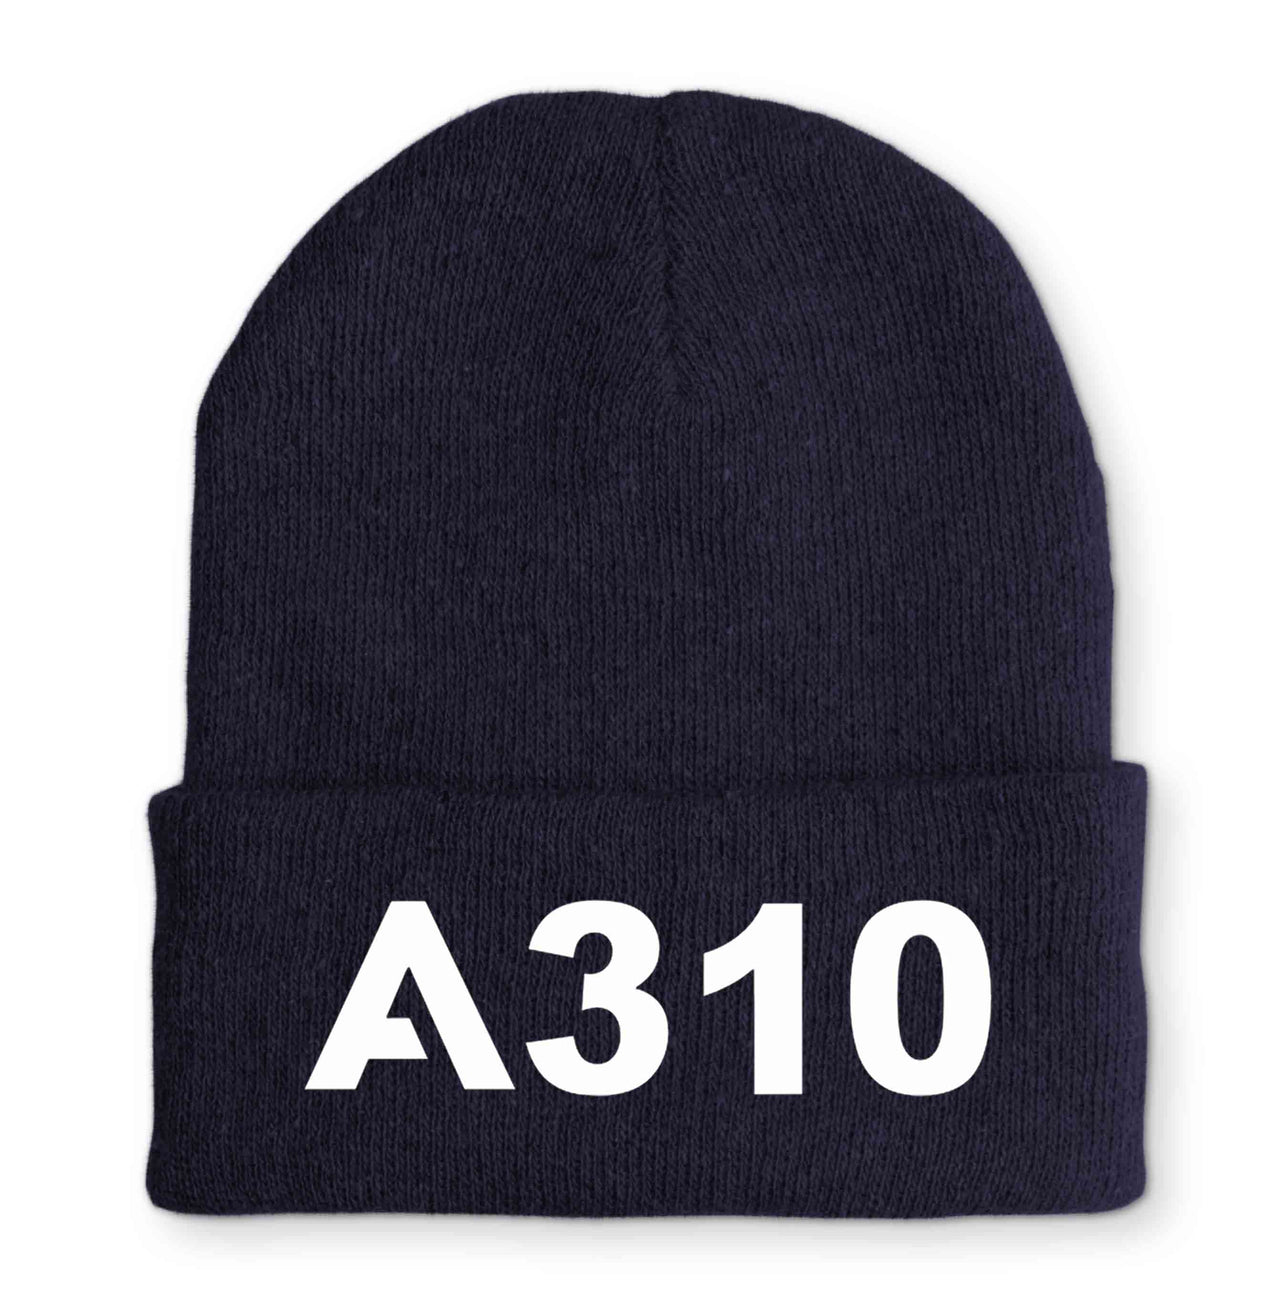 A310 Flat Text Embroidered Beanies